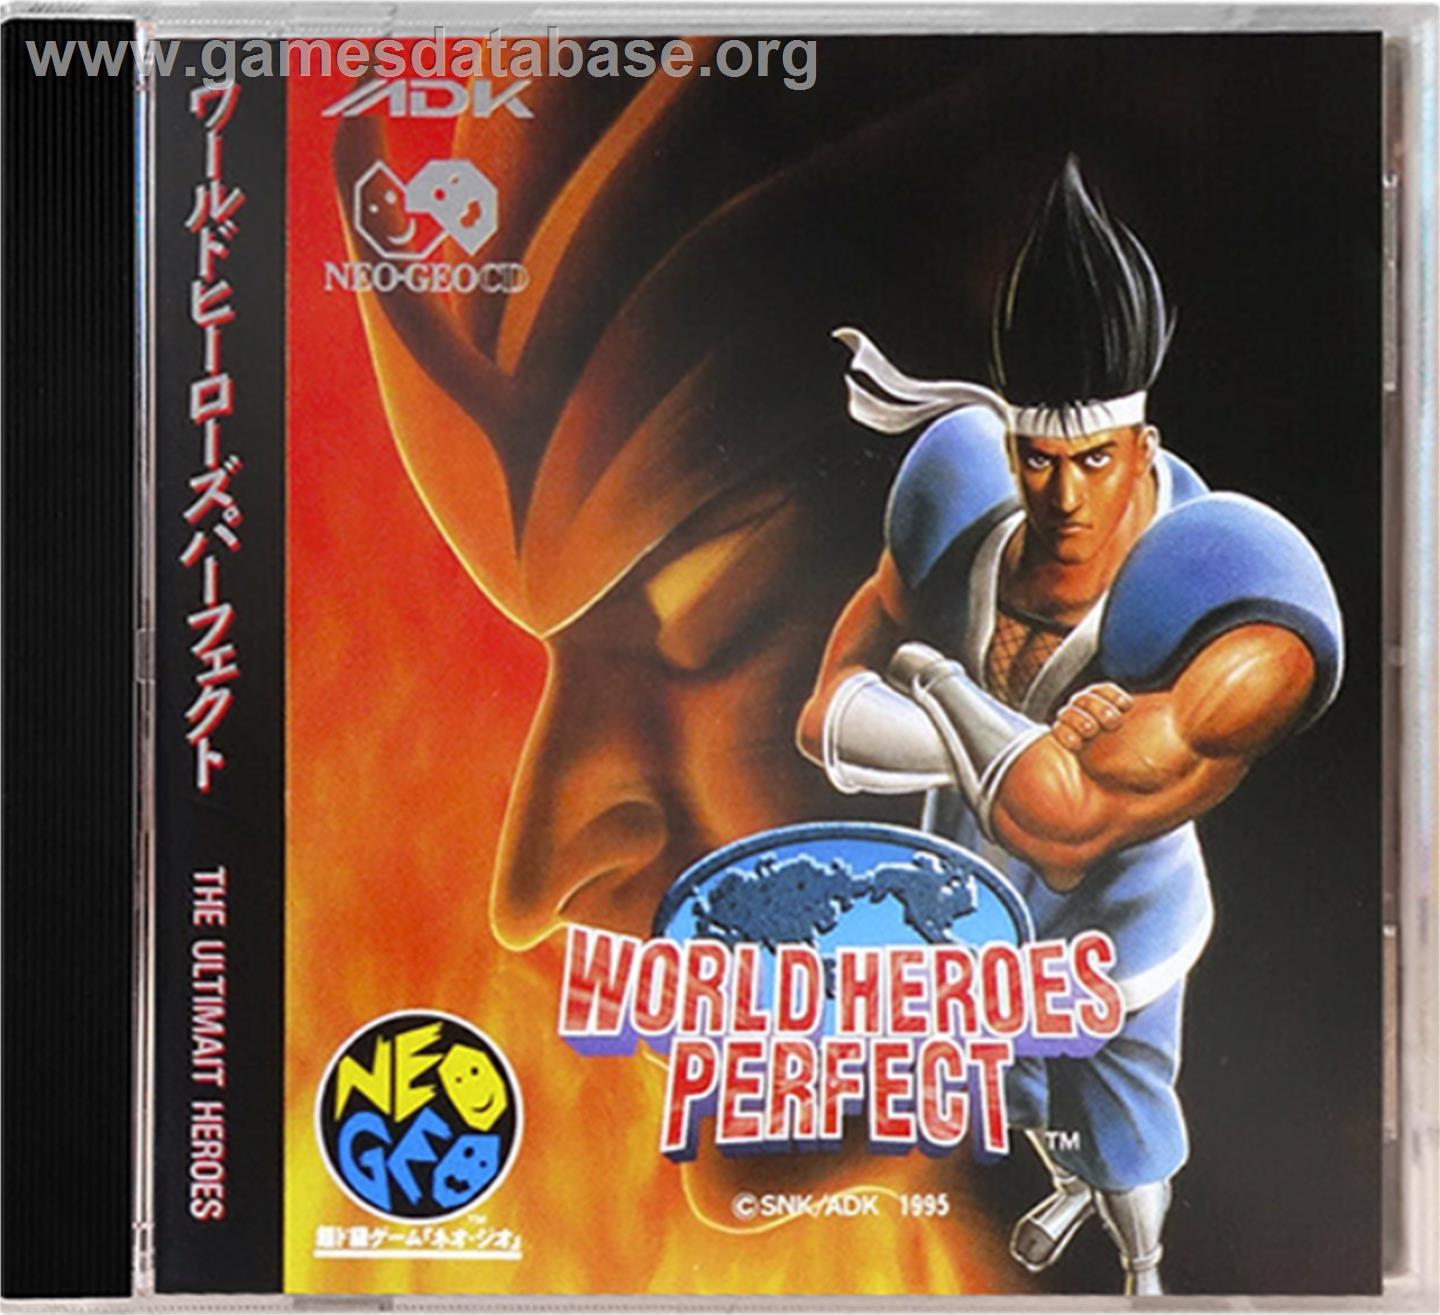 World Heroes Perfect: The Ultimate Heroes - SNK Neo-Geo CD - Artwork - Box